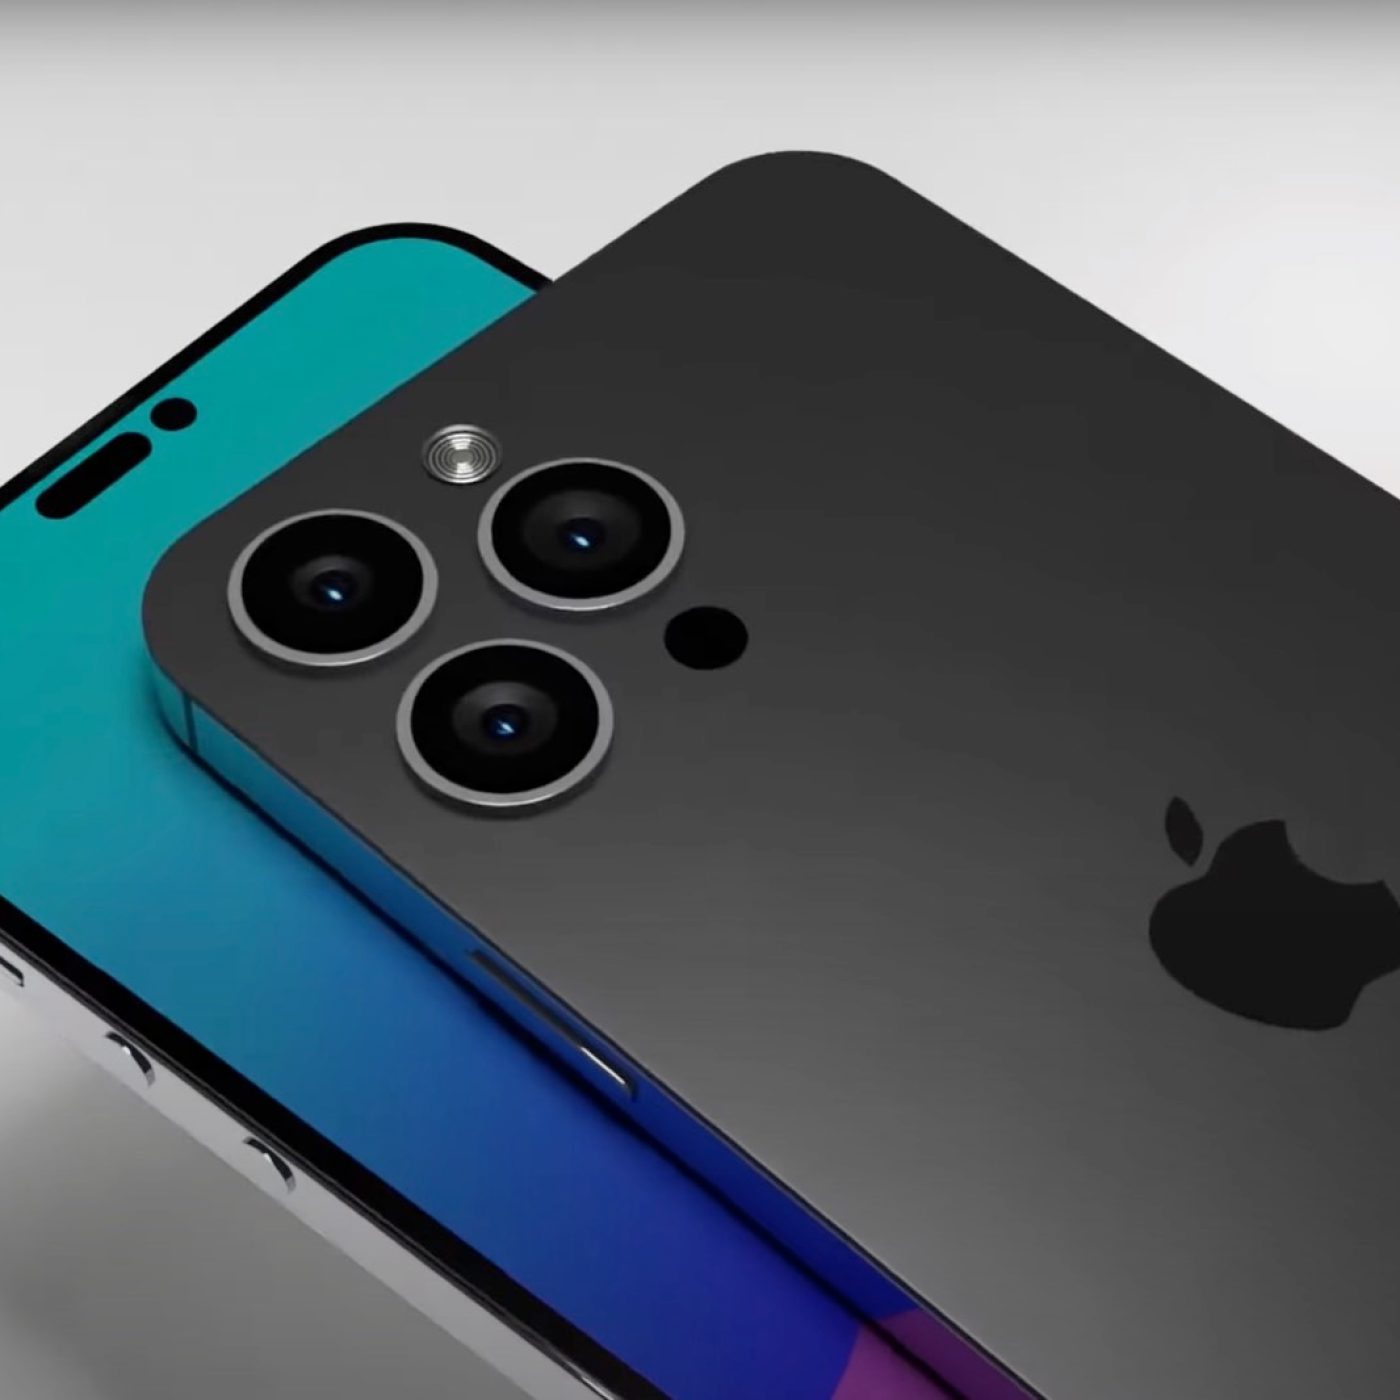 iPhone 14 Pro Max vs iPhone 12 Pro Max: How much better are the cameras?